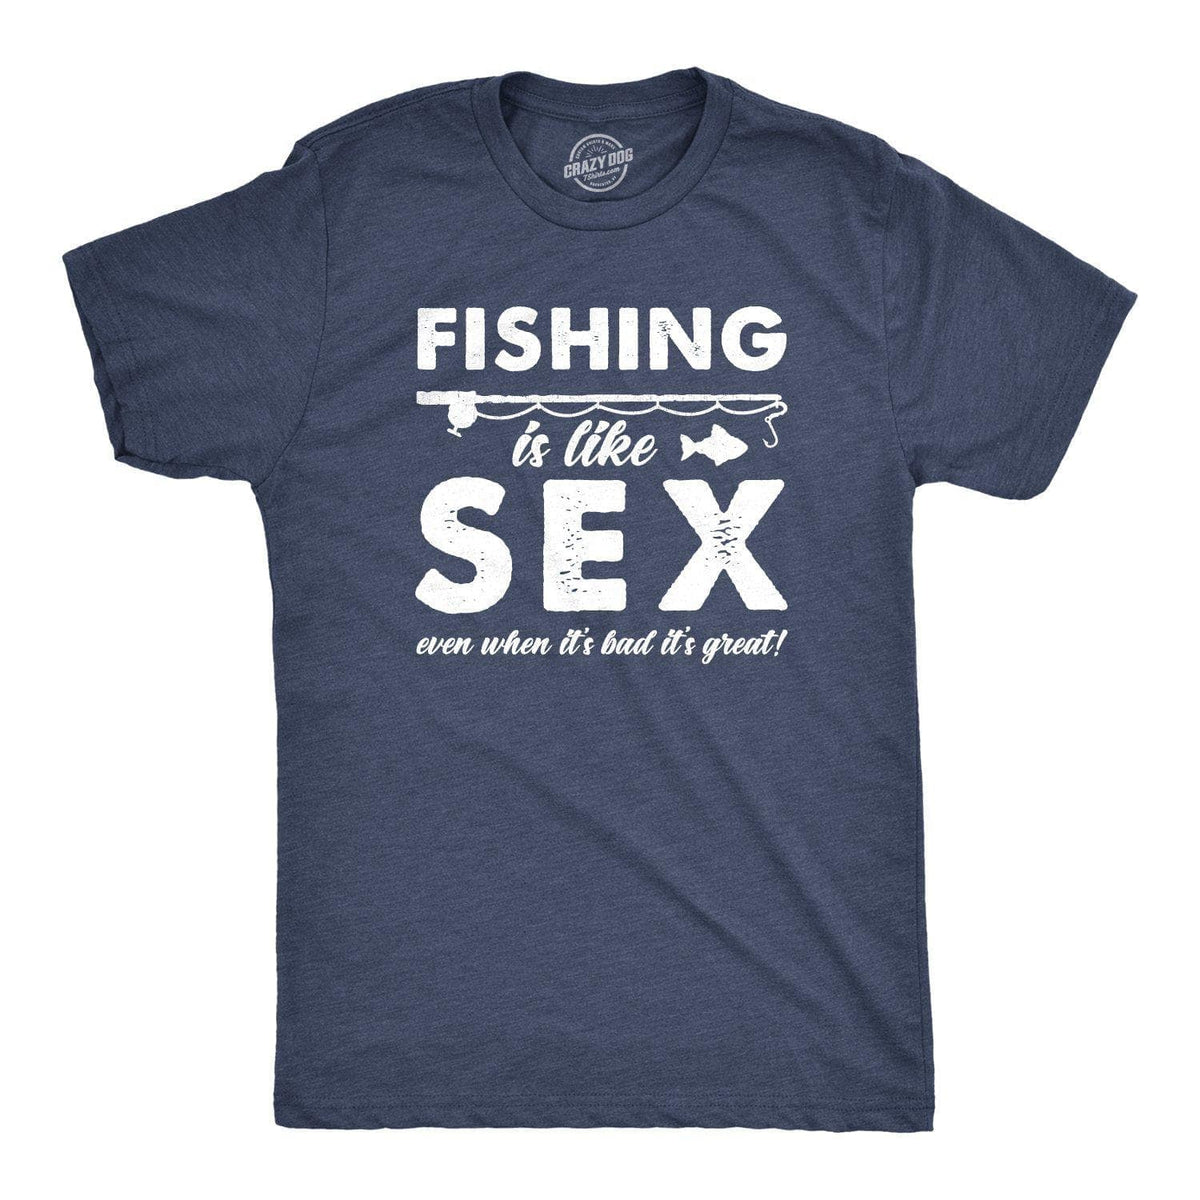 Mens Fishing Is Like Sex Even When Its Bad Its Great Tshirt Funny Outdoors Tee